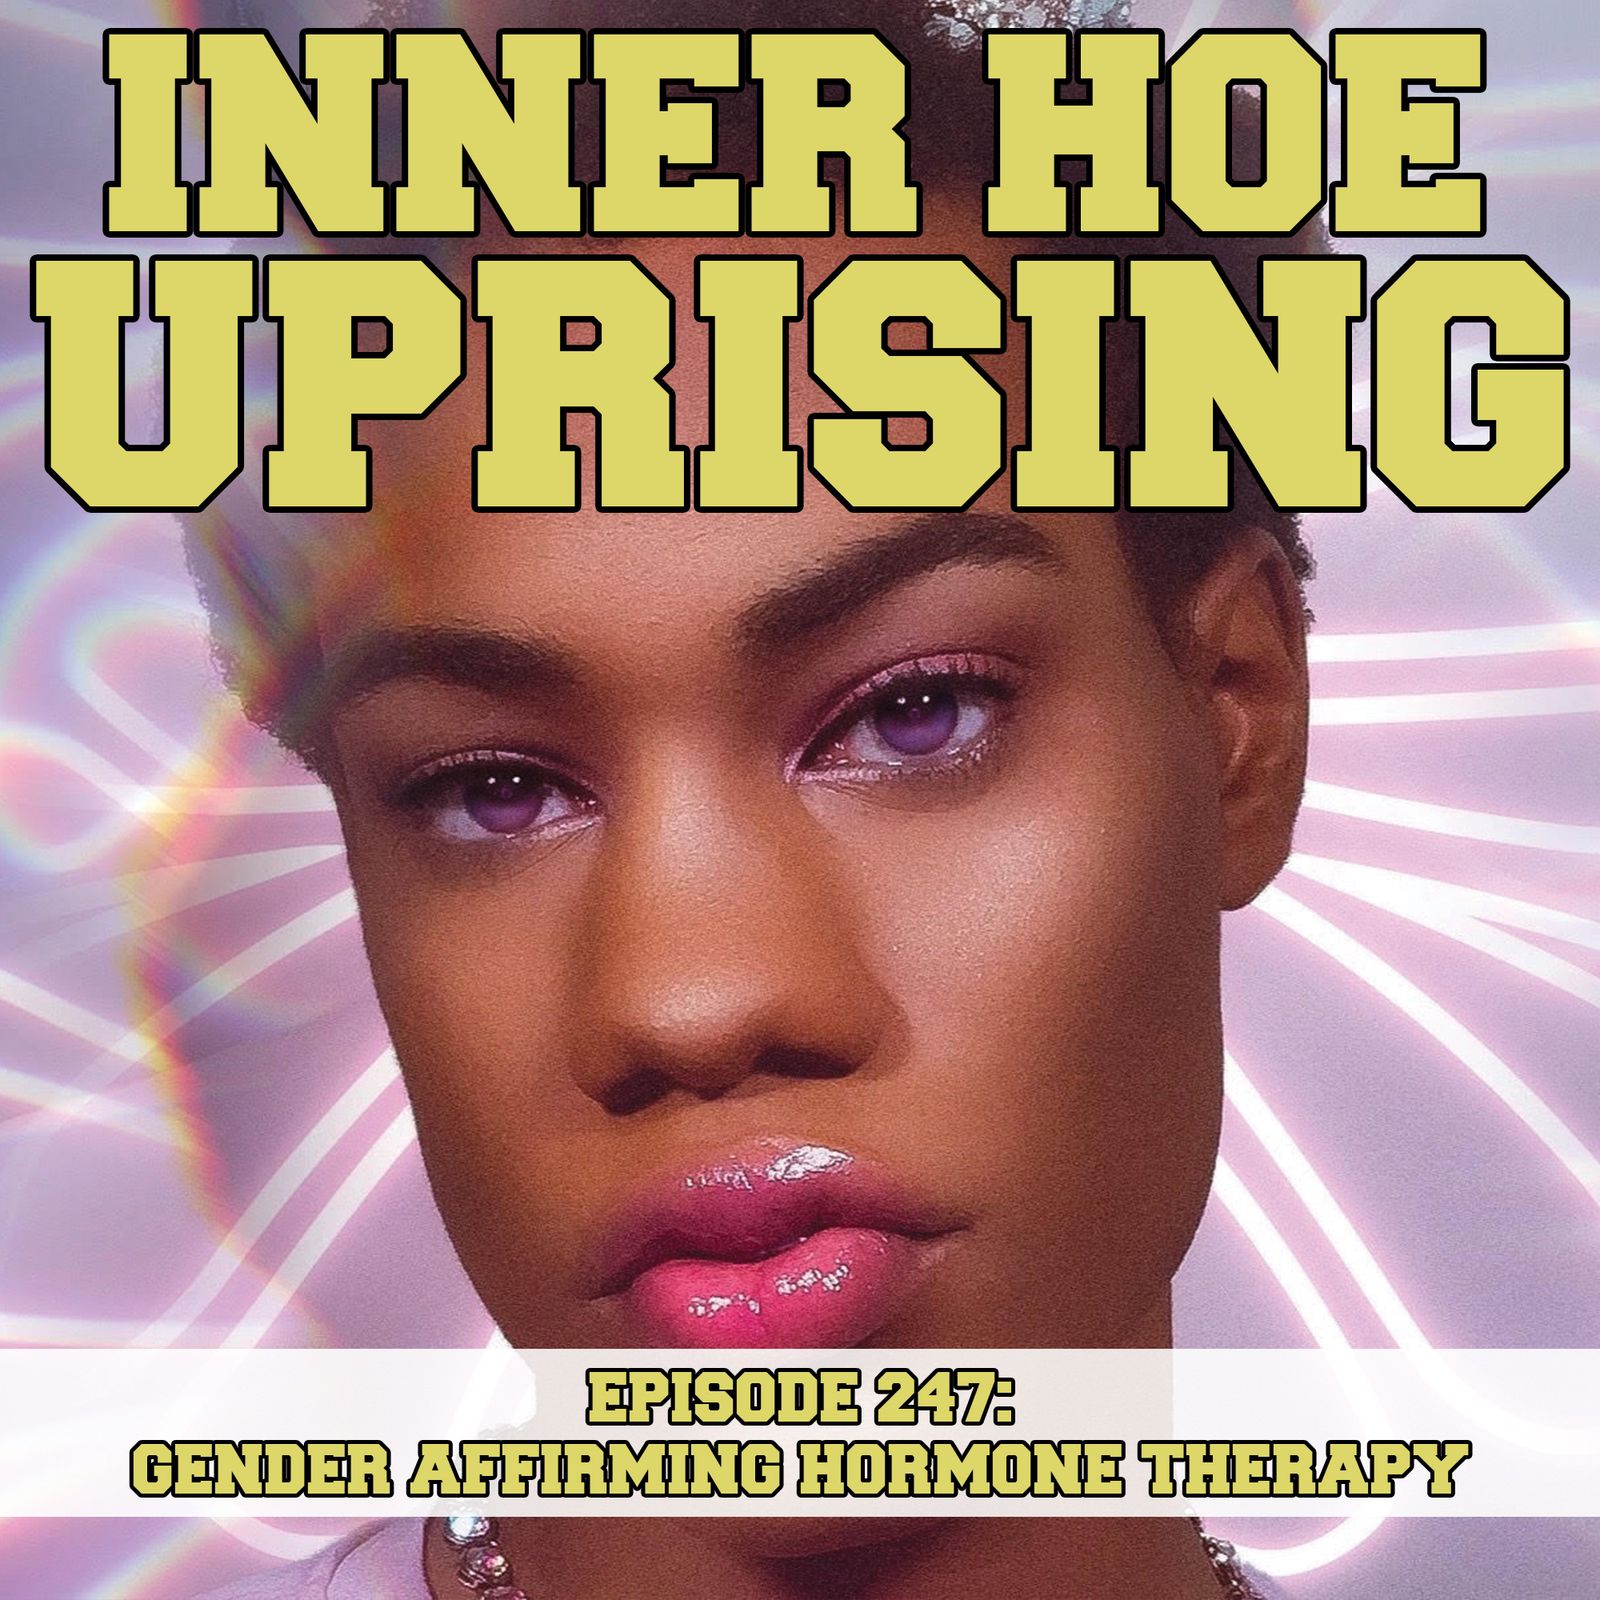 Thumbnail for "S8 Ep4: A Journey with Gender Affirming Hormone Therapy".